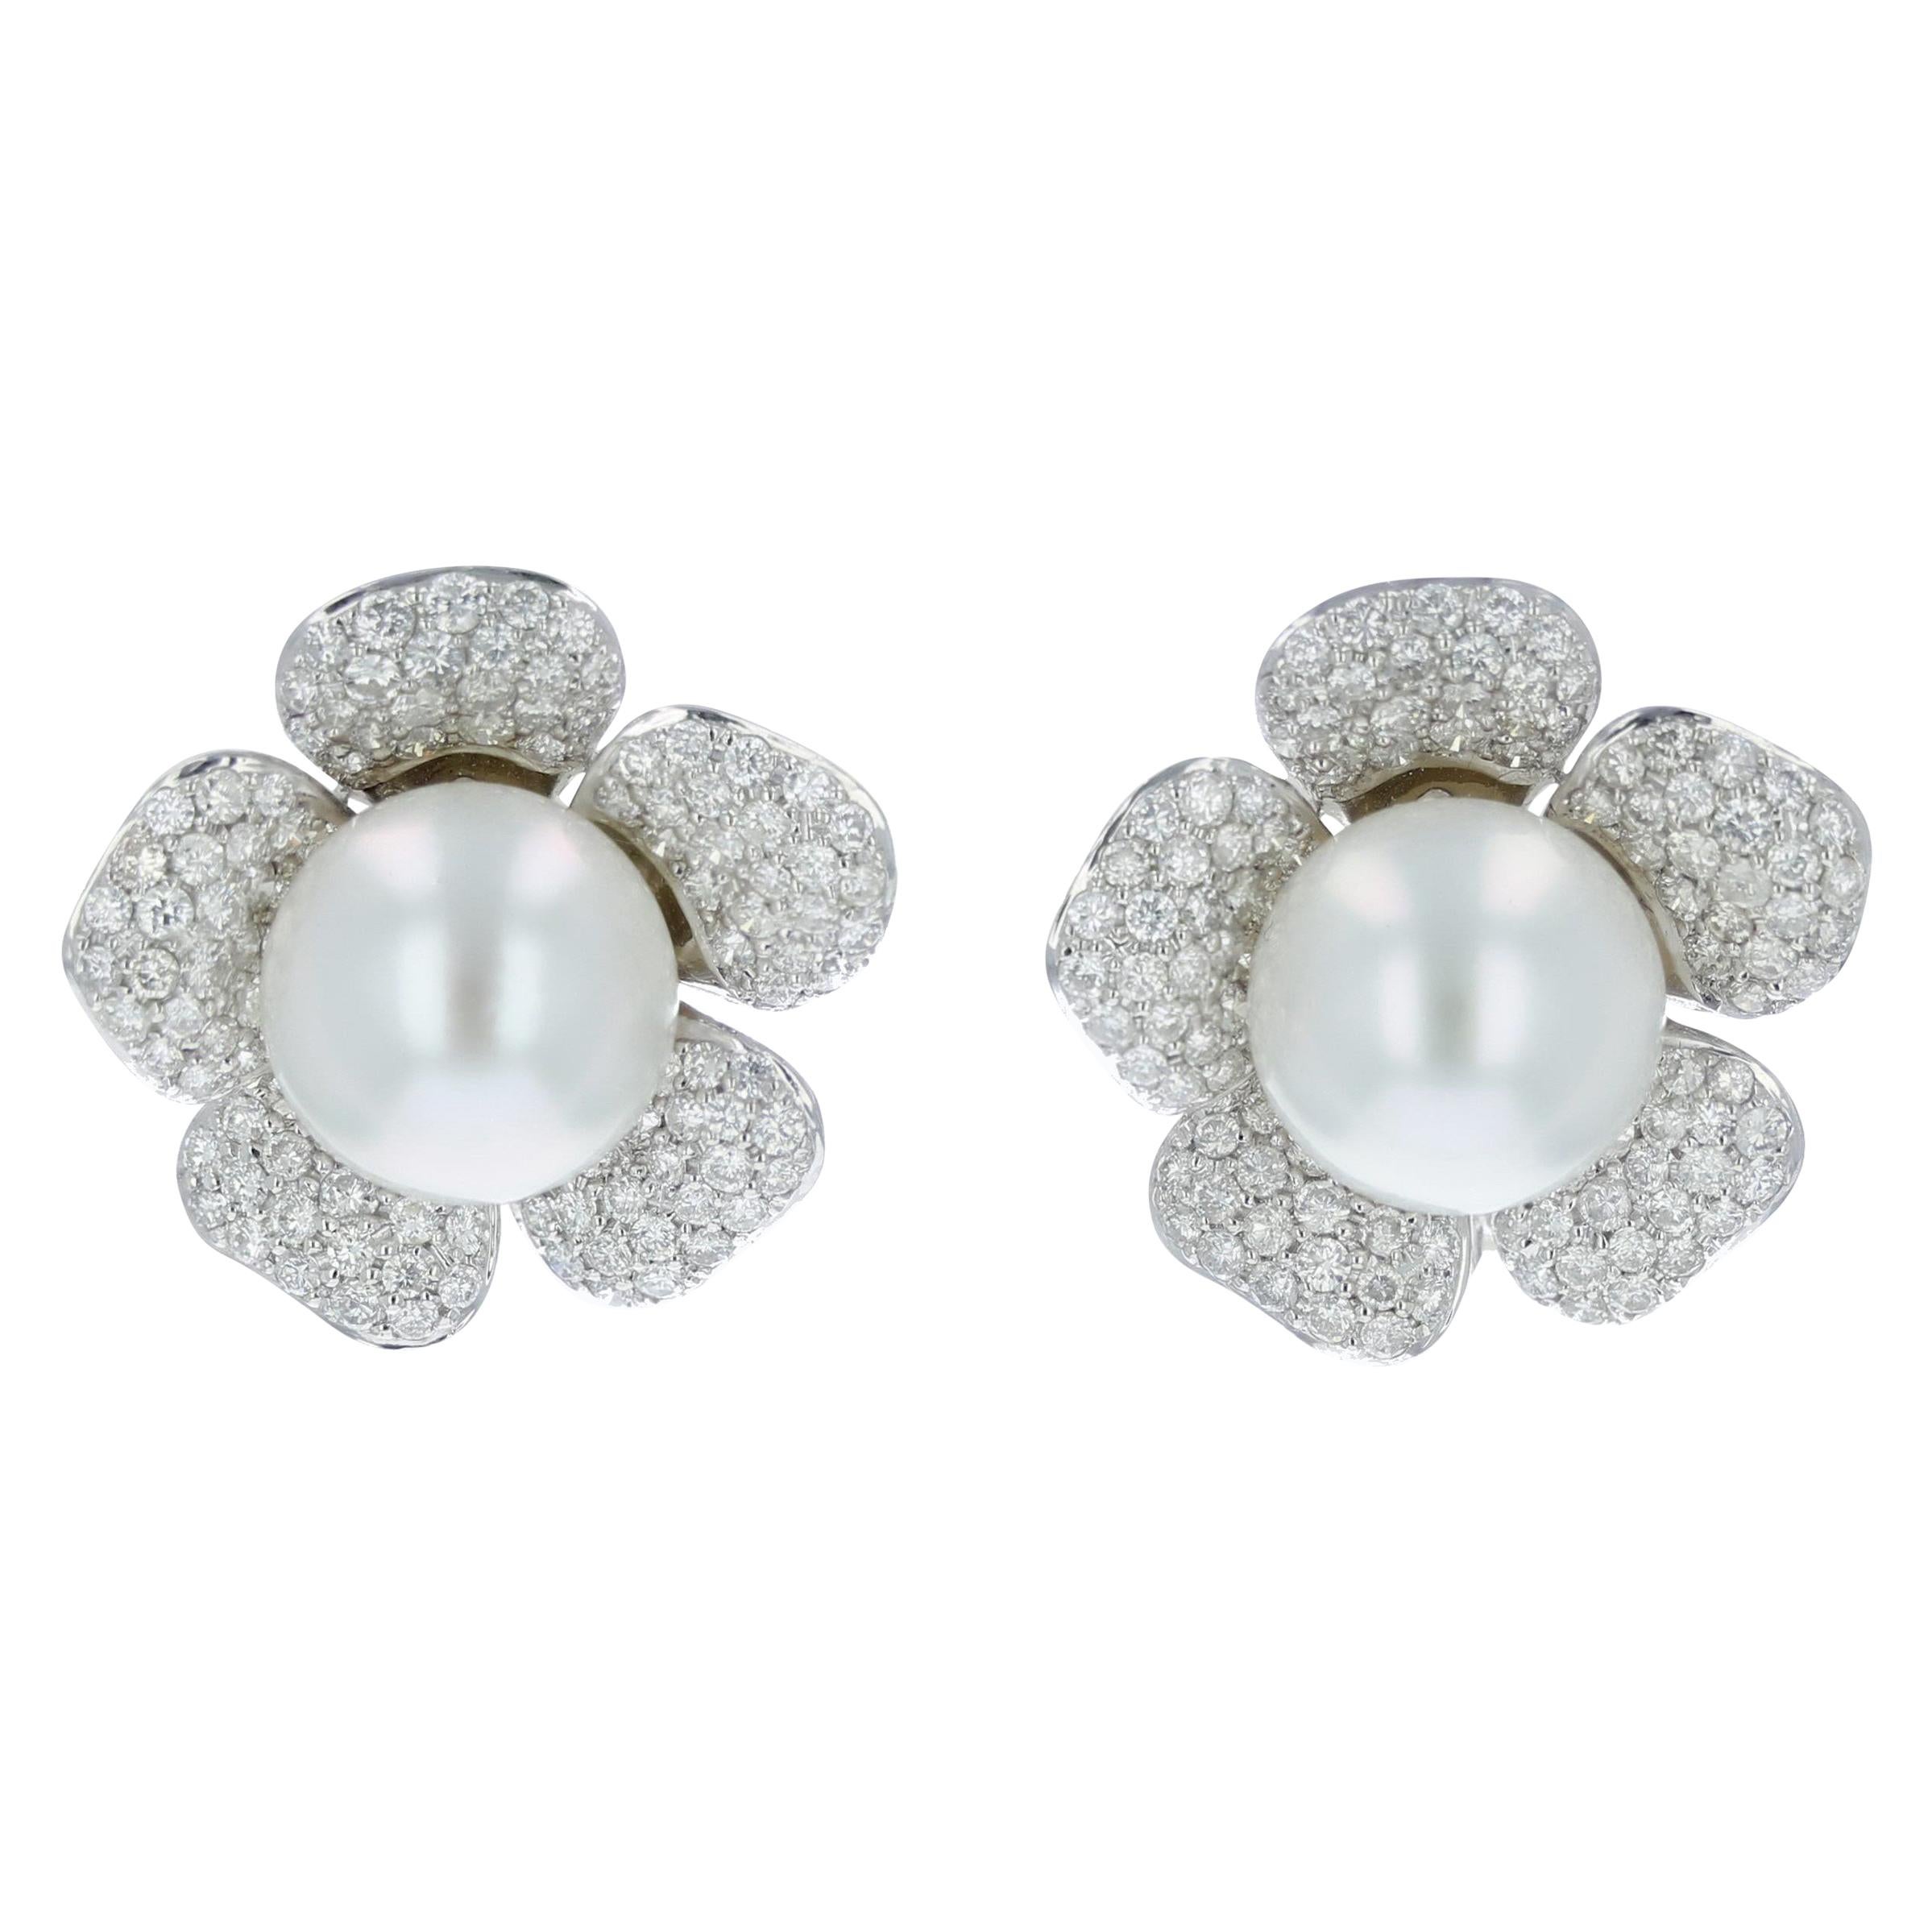 Estate South Sea Pearl and Diamond Pave Flower Earrings